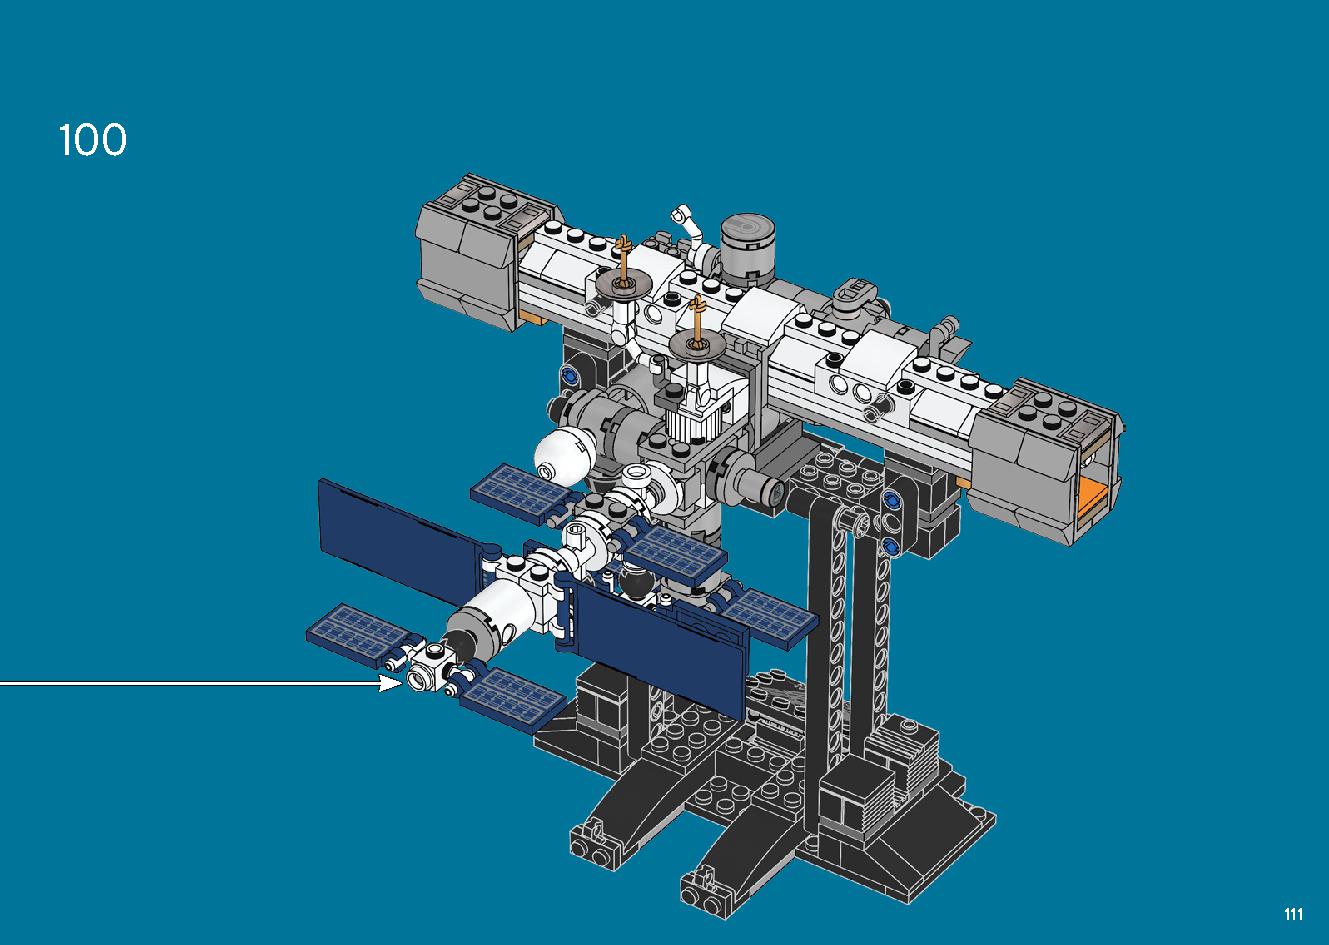 International Space Station 21321 LEGO information LEGO instructions 111 page